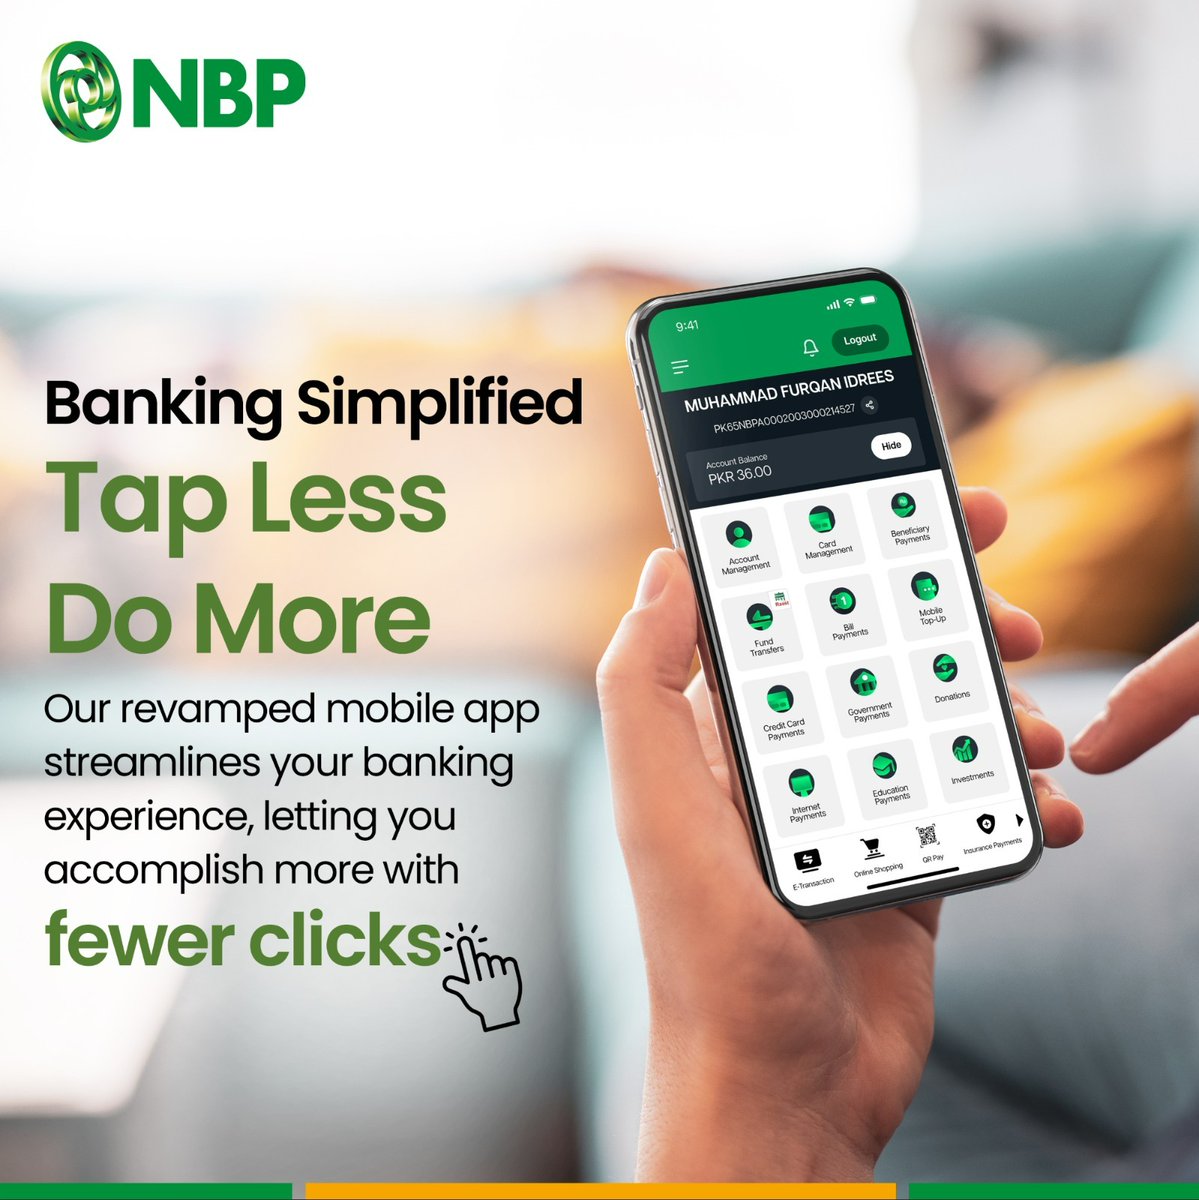 Banking Simplified! Tap less, Do More!
Experience seamless banking with our revamped mobile app.

Download Now!

#NBP #TheNationsBank #NBPDigitalApp #NationalBankofPakistan #BankingApp